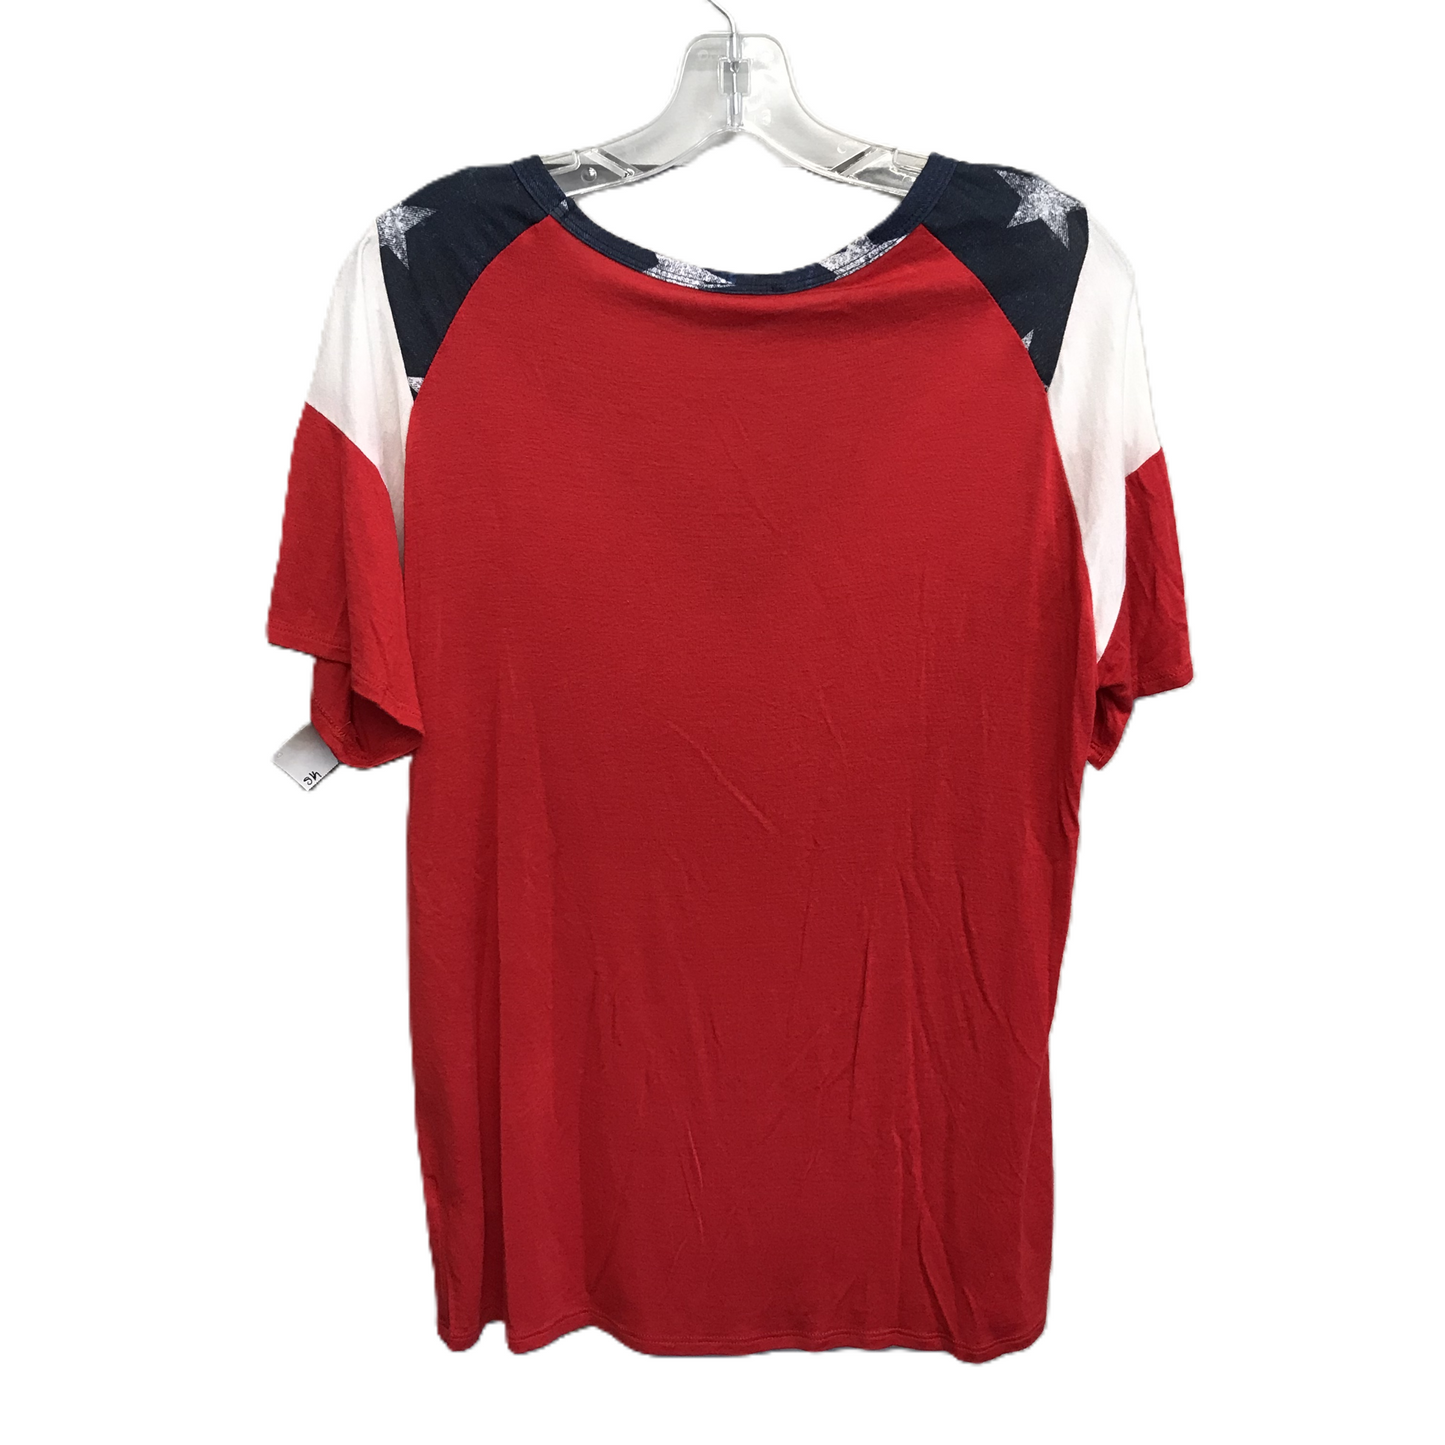 Blue & Red & White Top Short Sleeve By Bibi, Size: S